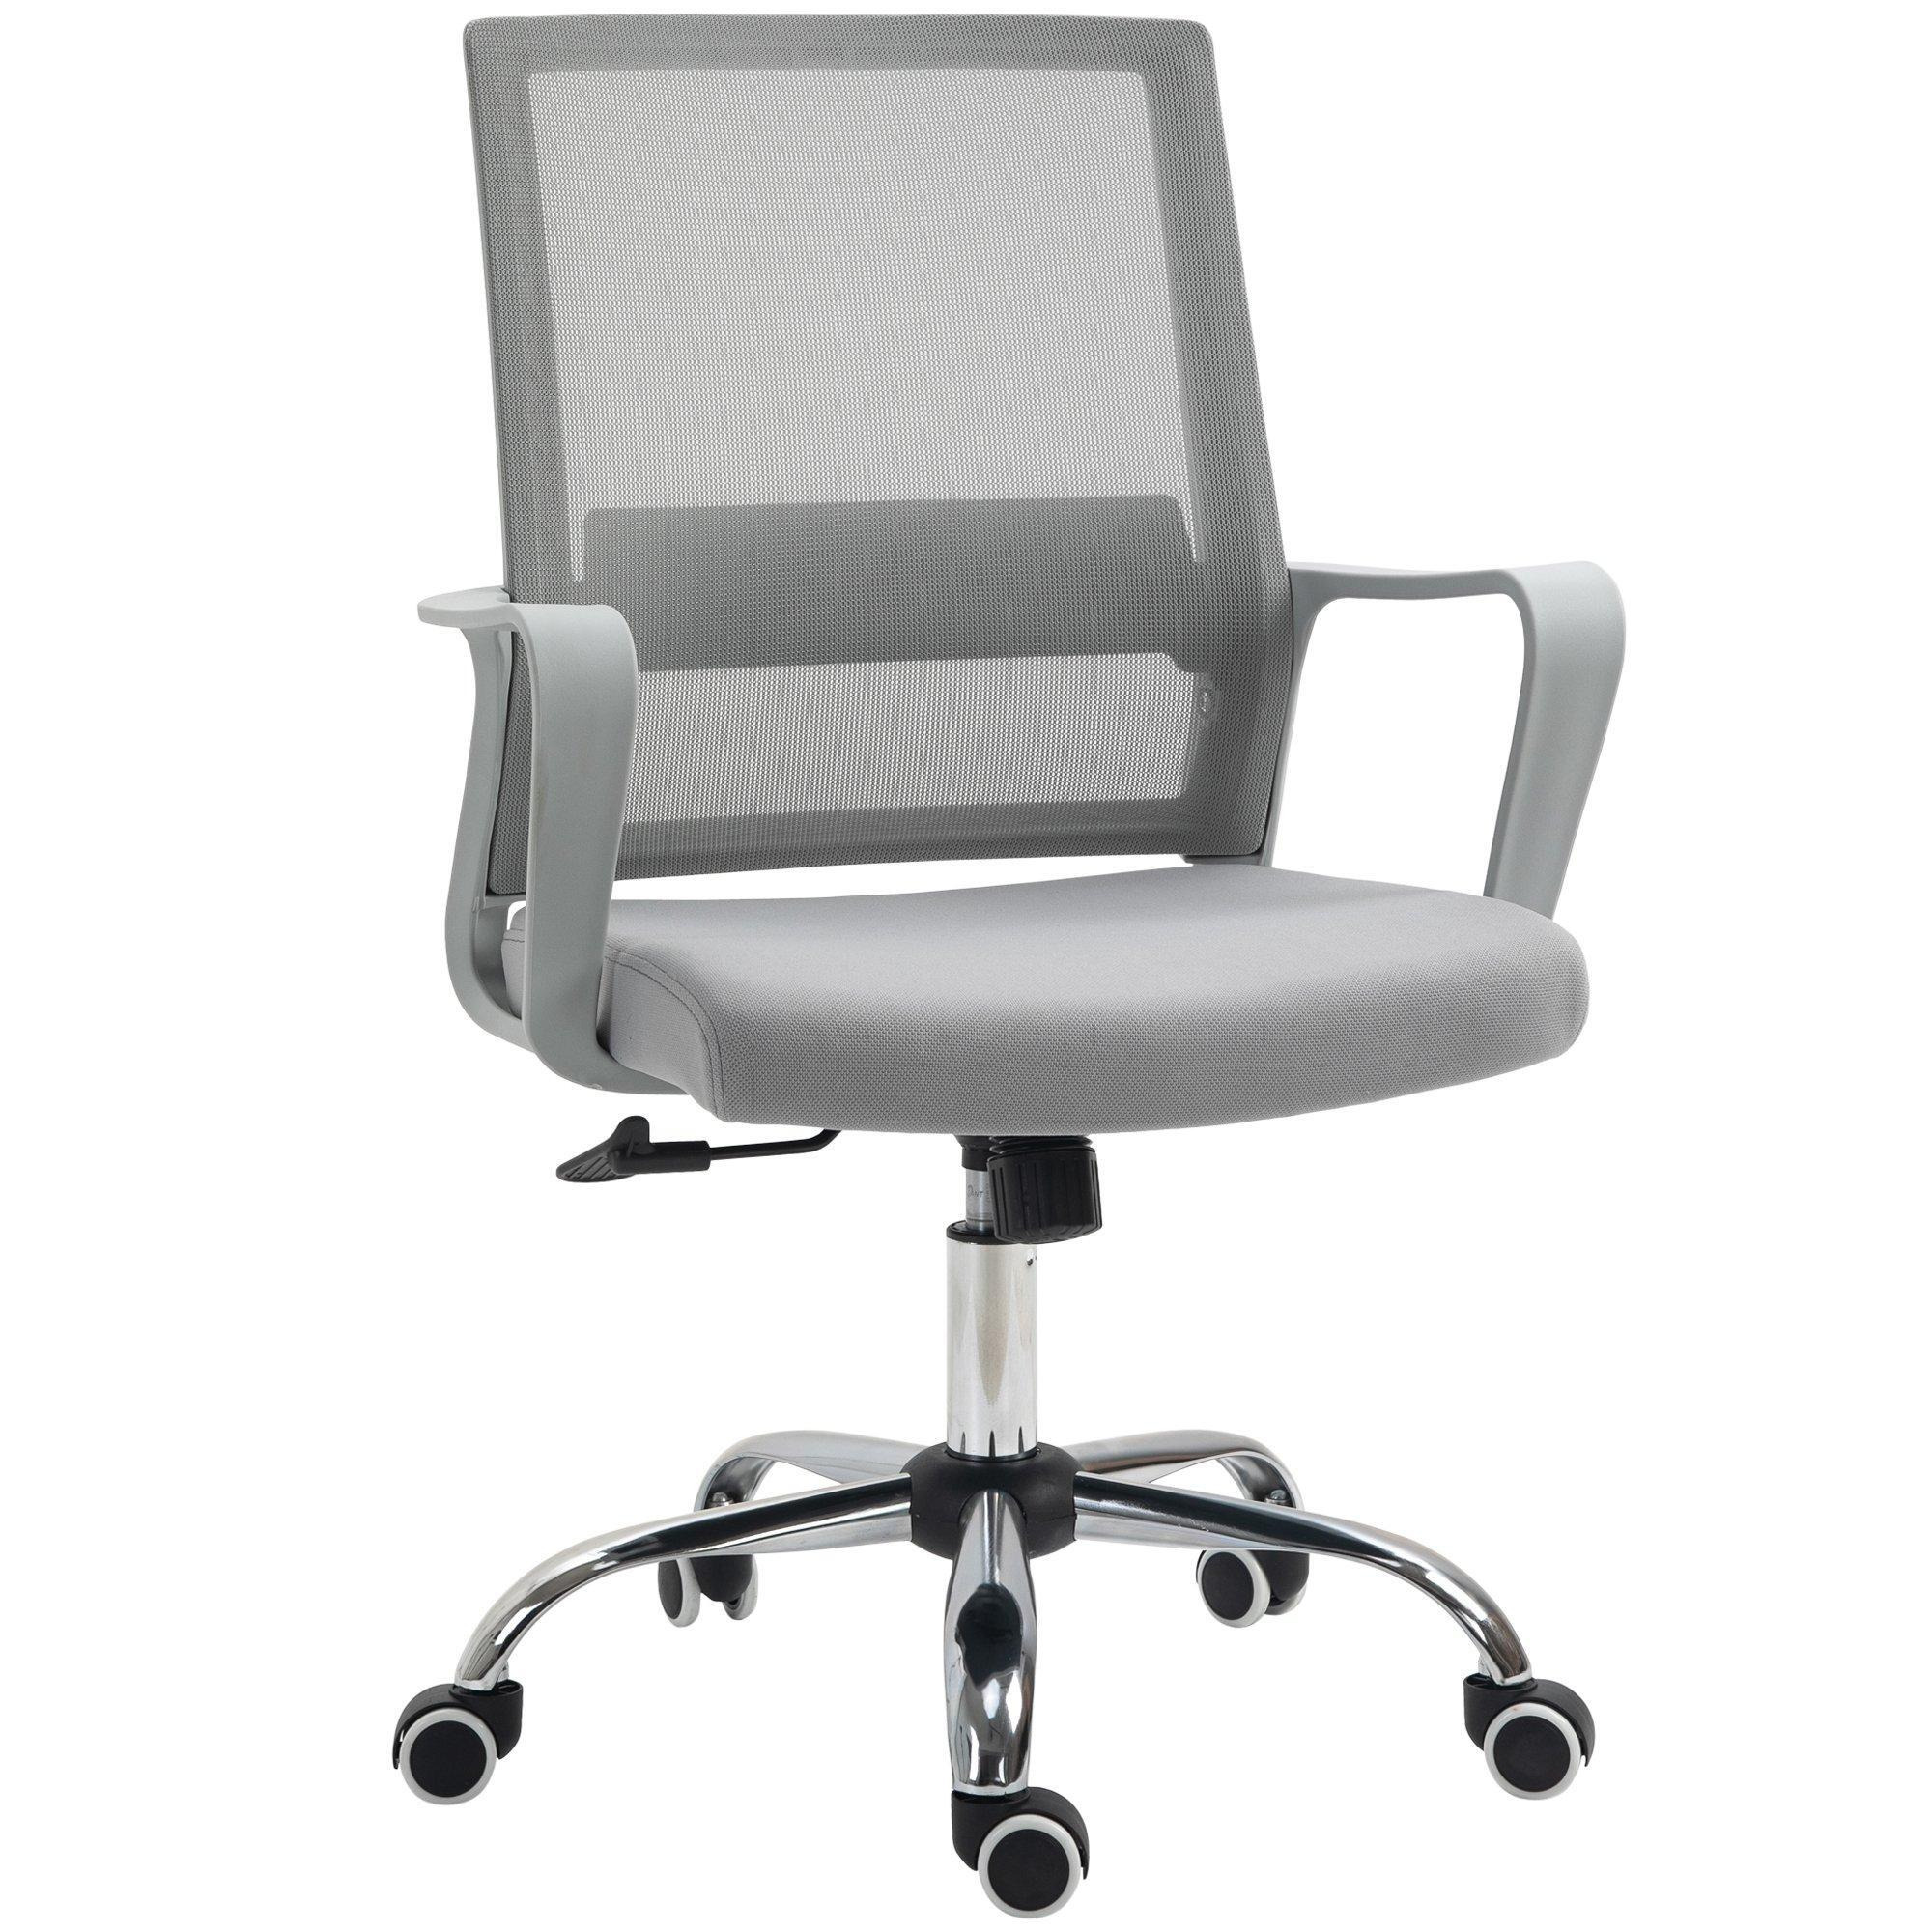 Ergonomic Office Chair Adjustable Height Mesh with Swivel Wheels - image 1